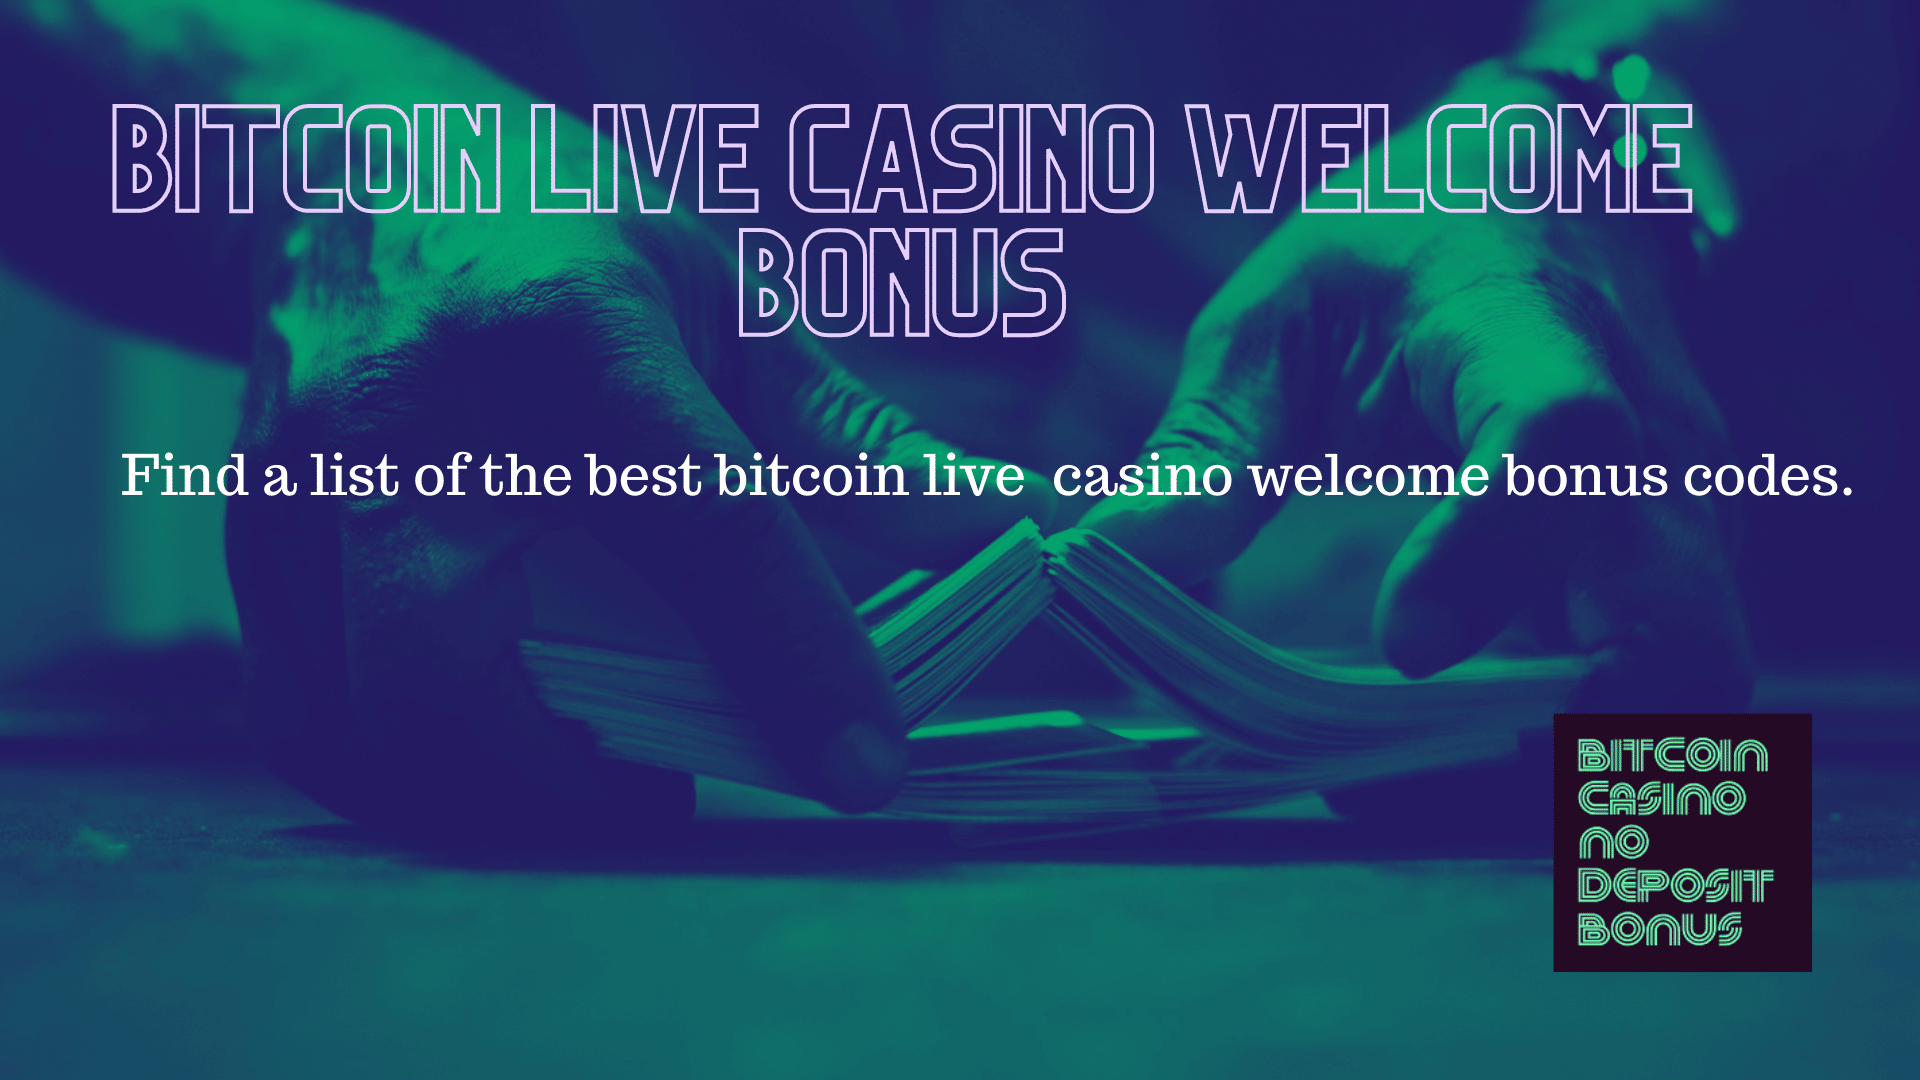 How Much Do You Charge For bitcoin online casino